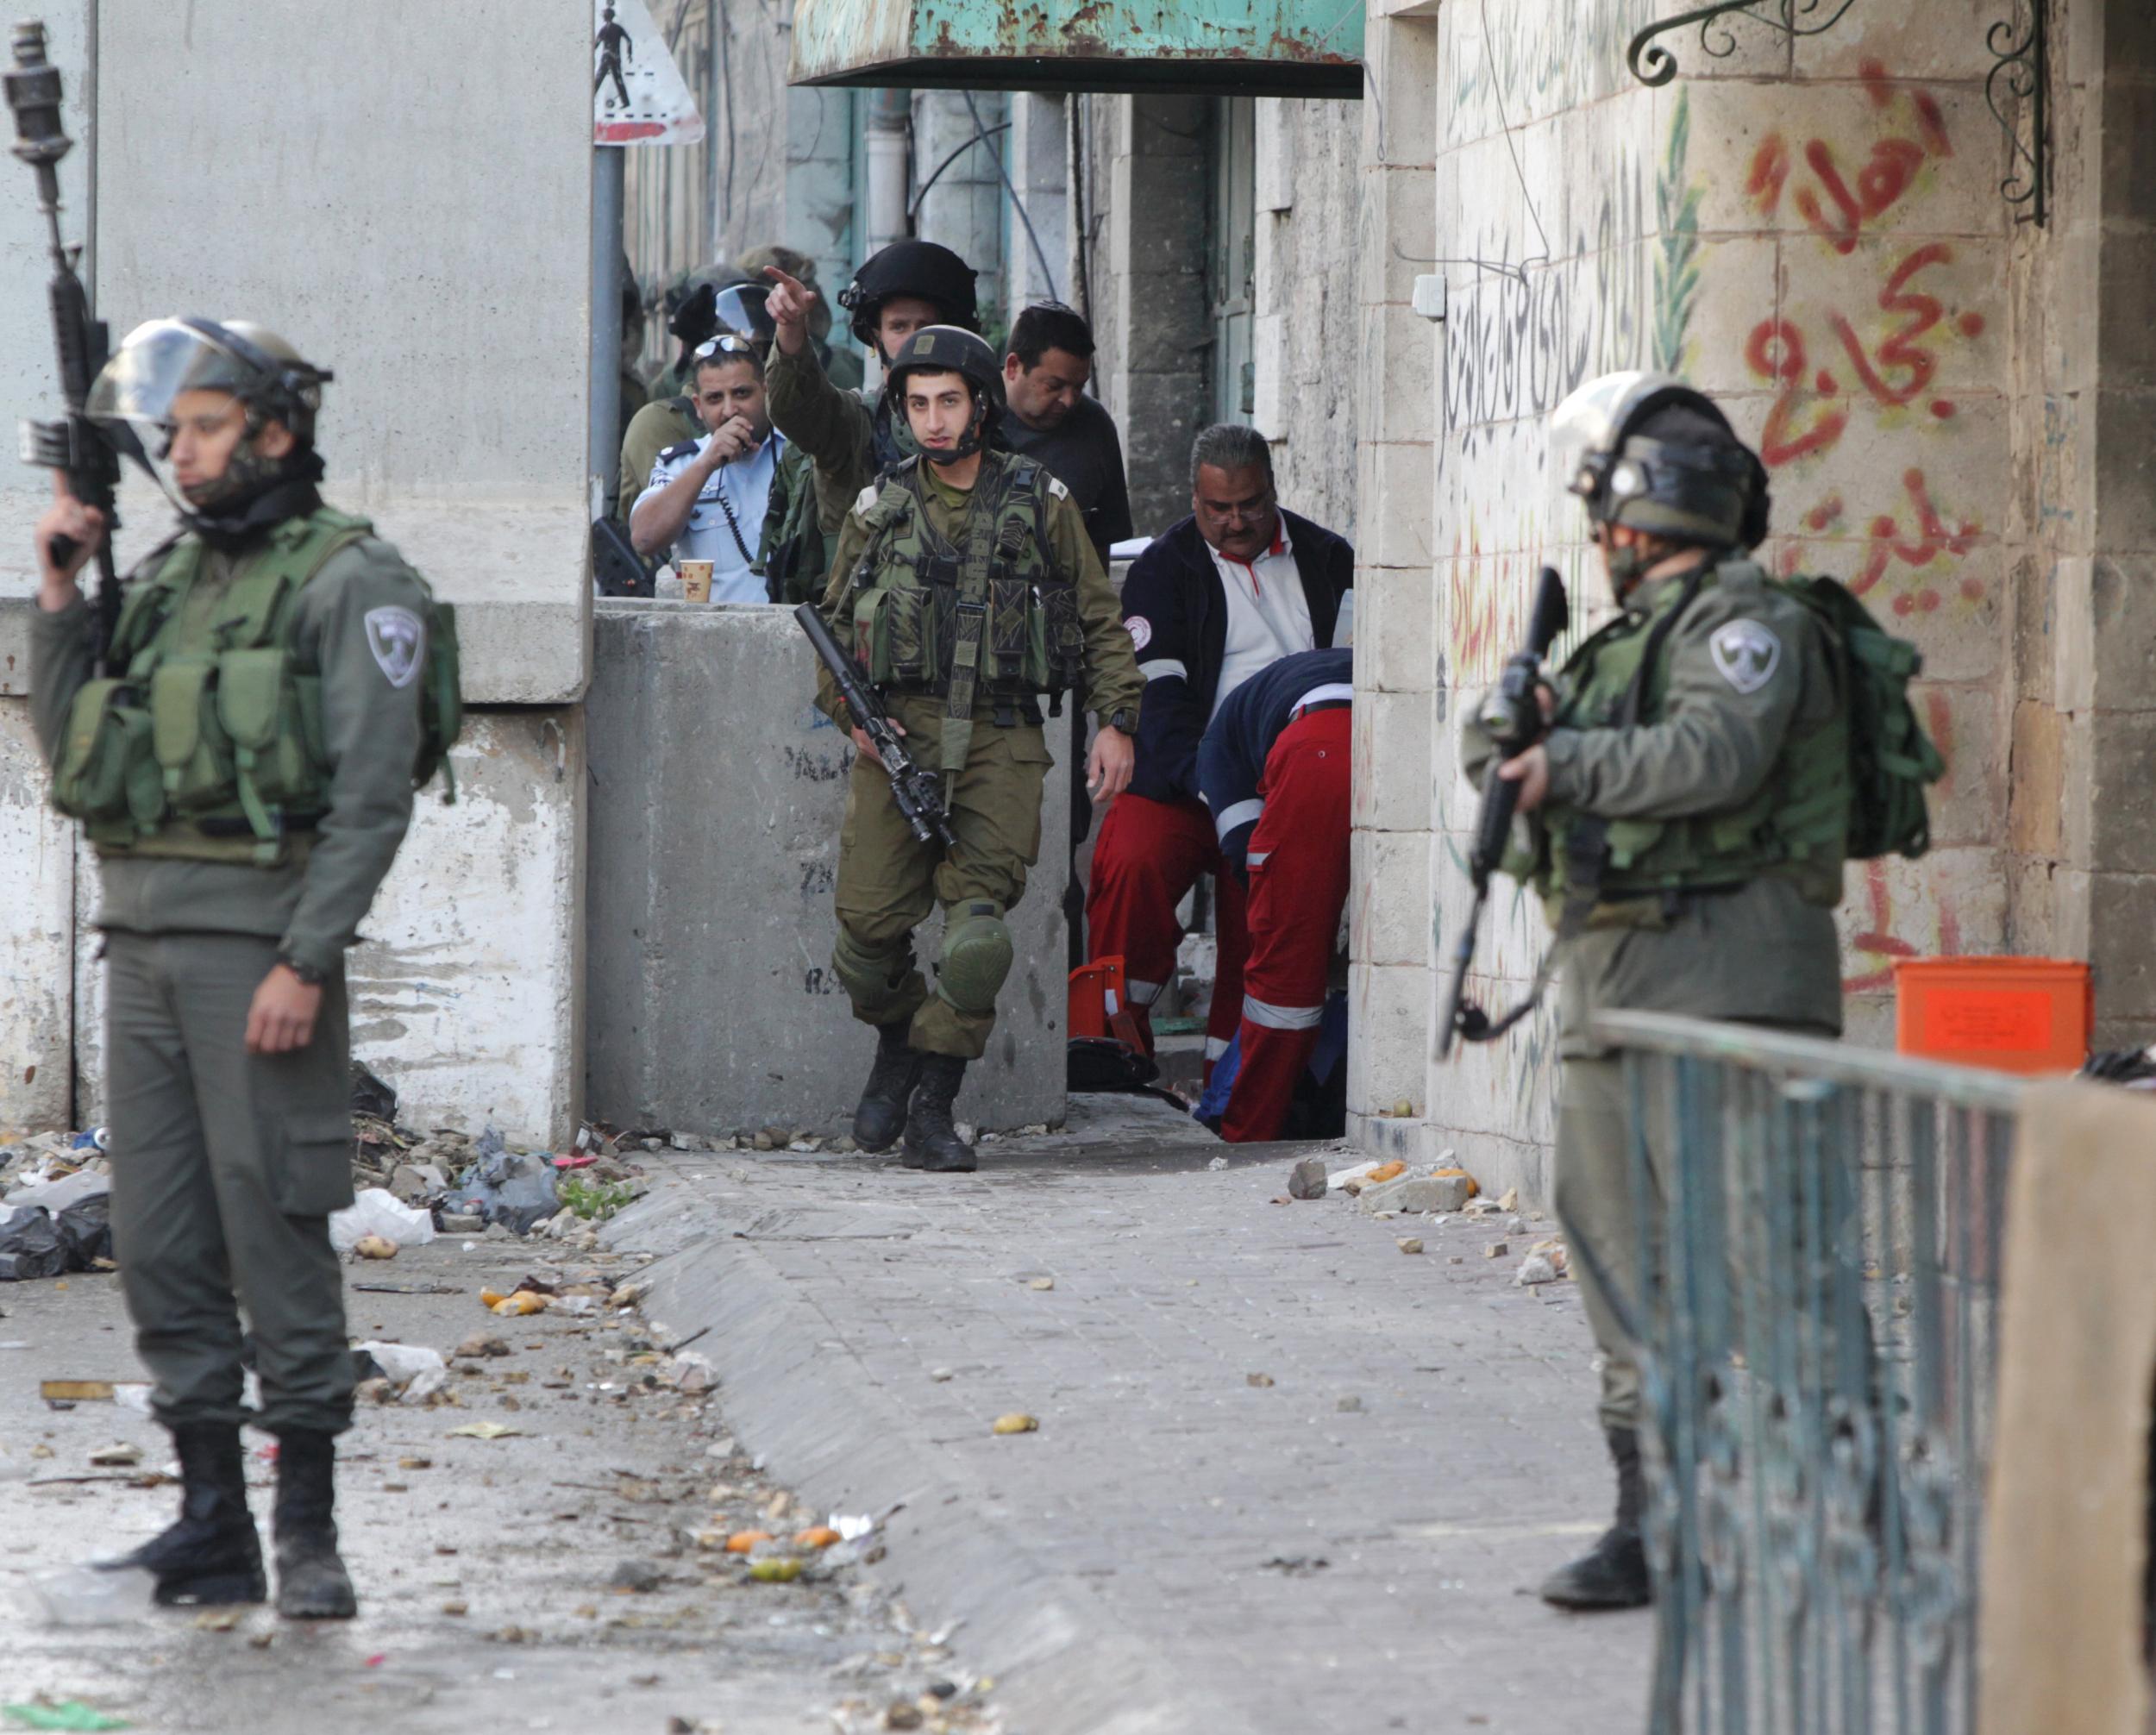 Israeli troops stand guard as medics treat a Palestinian woman hit with rubber attacks during an attempted attack on the army in Hebron in the West Bank